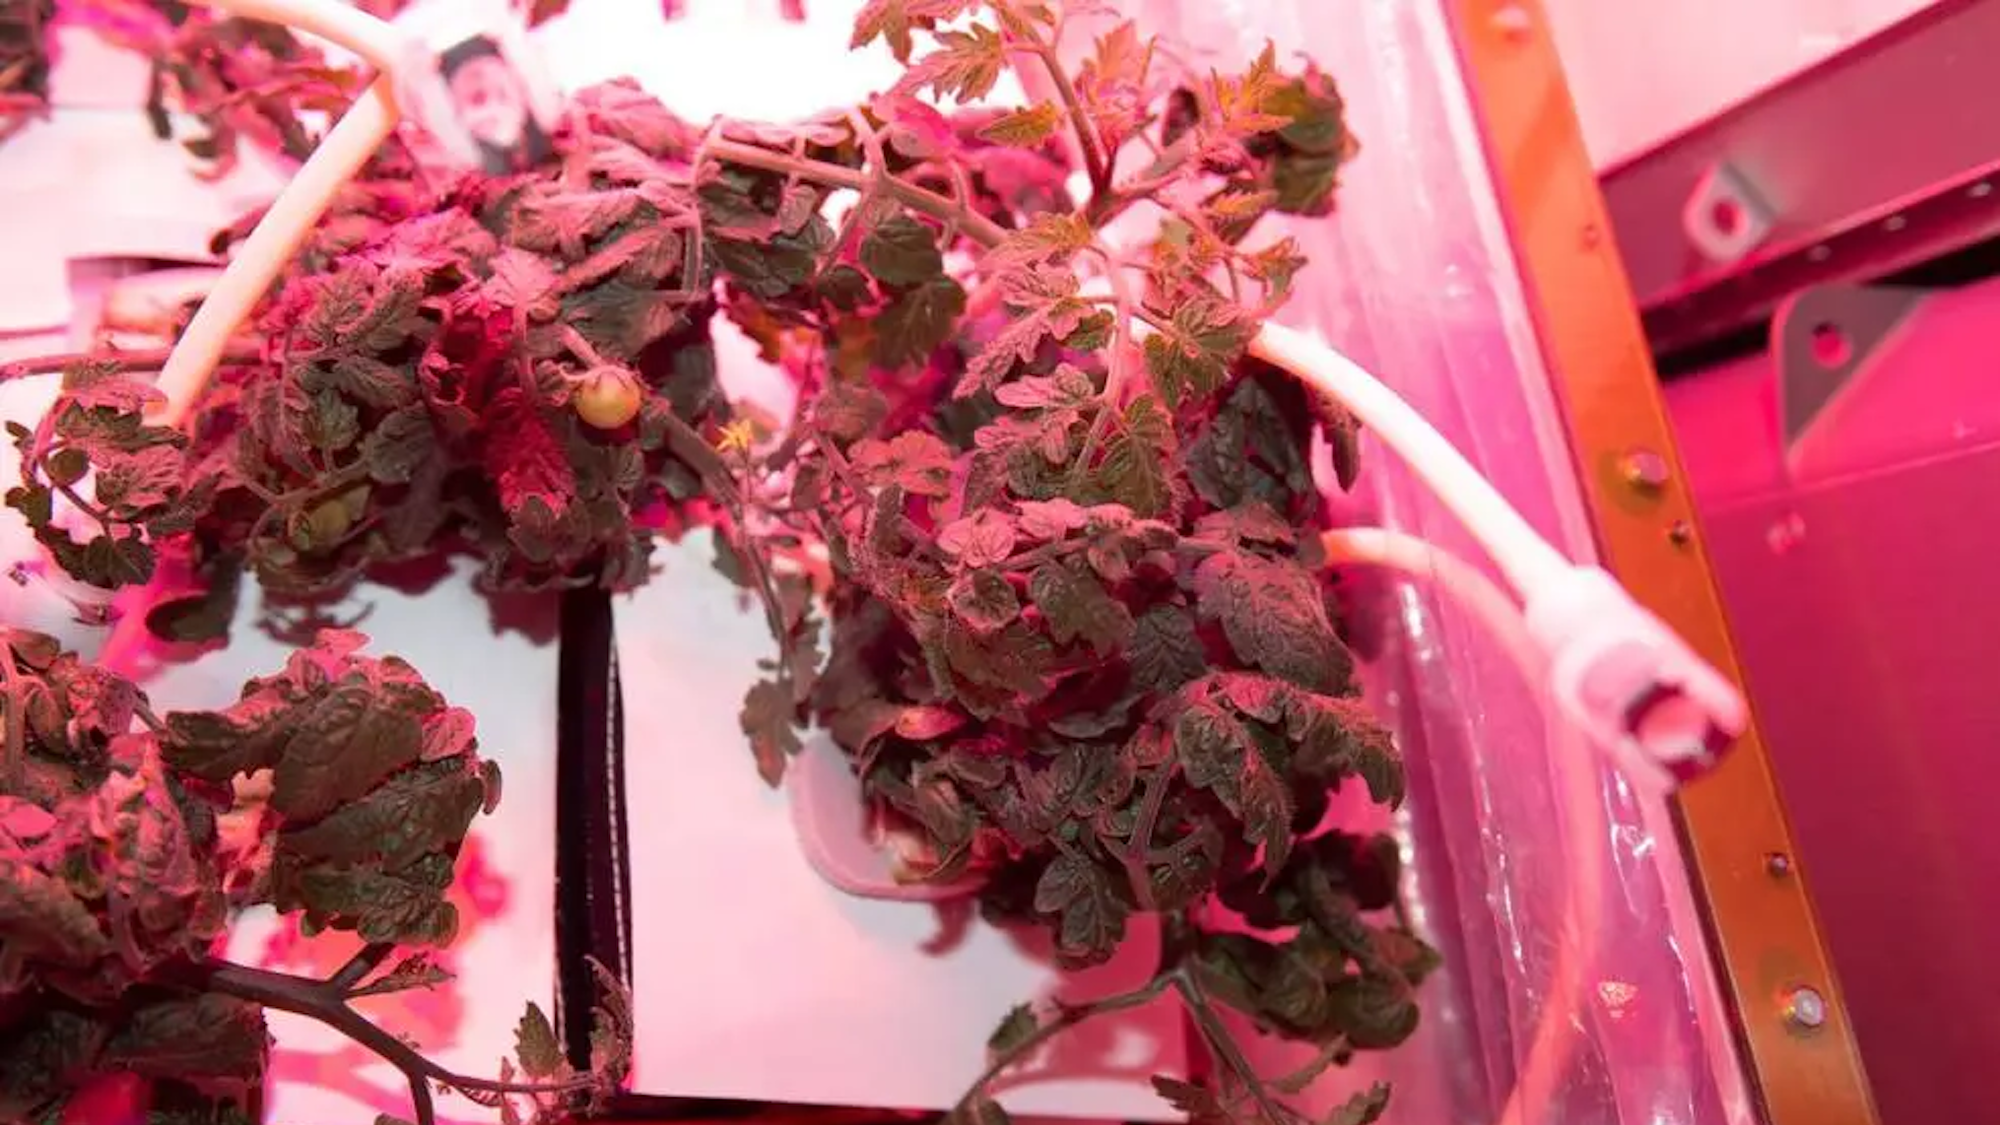 Tomato plant grown on ISS